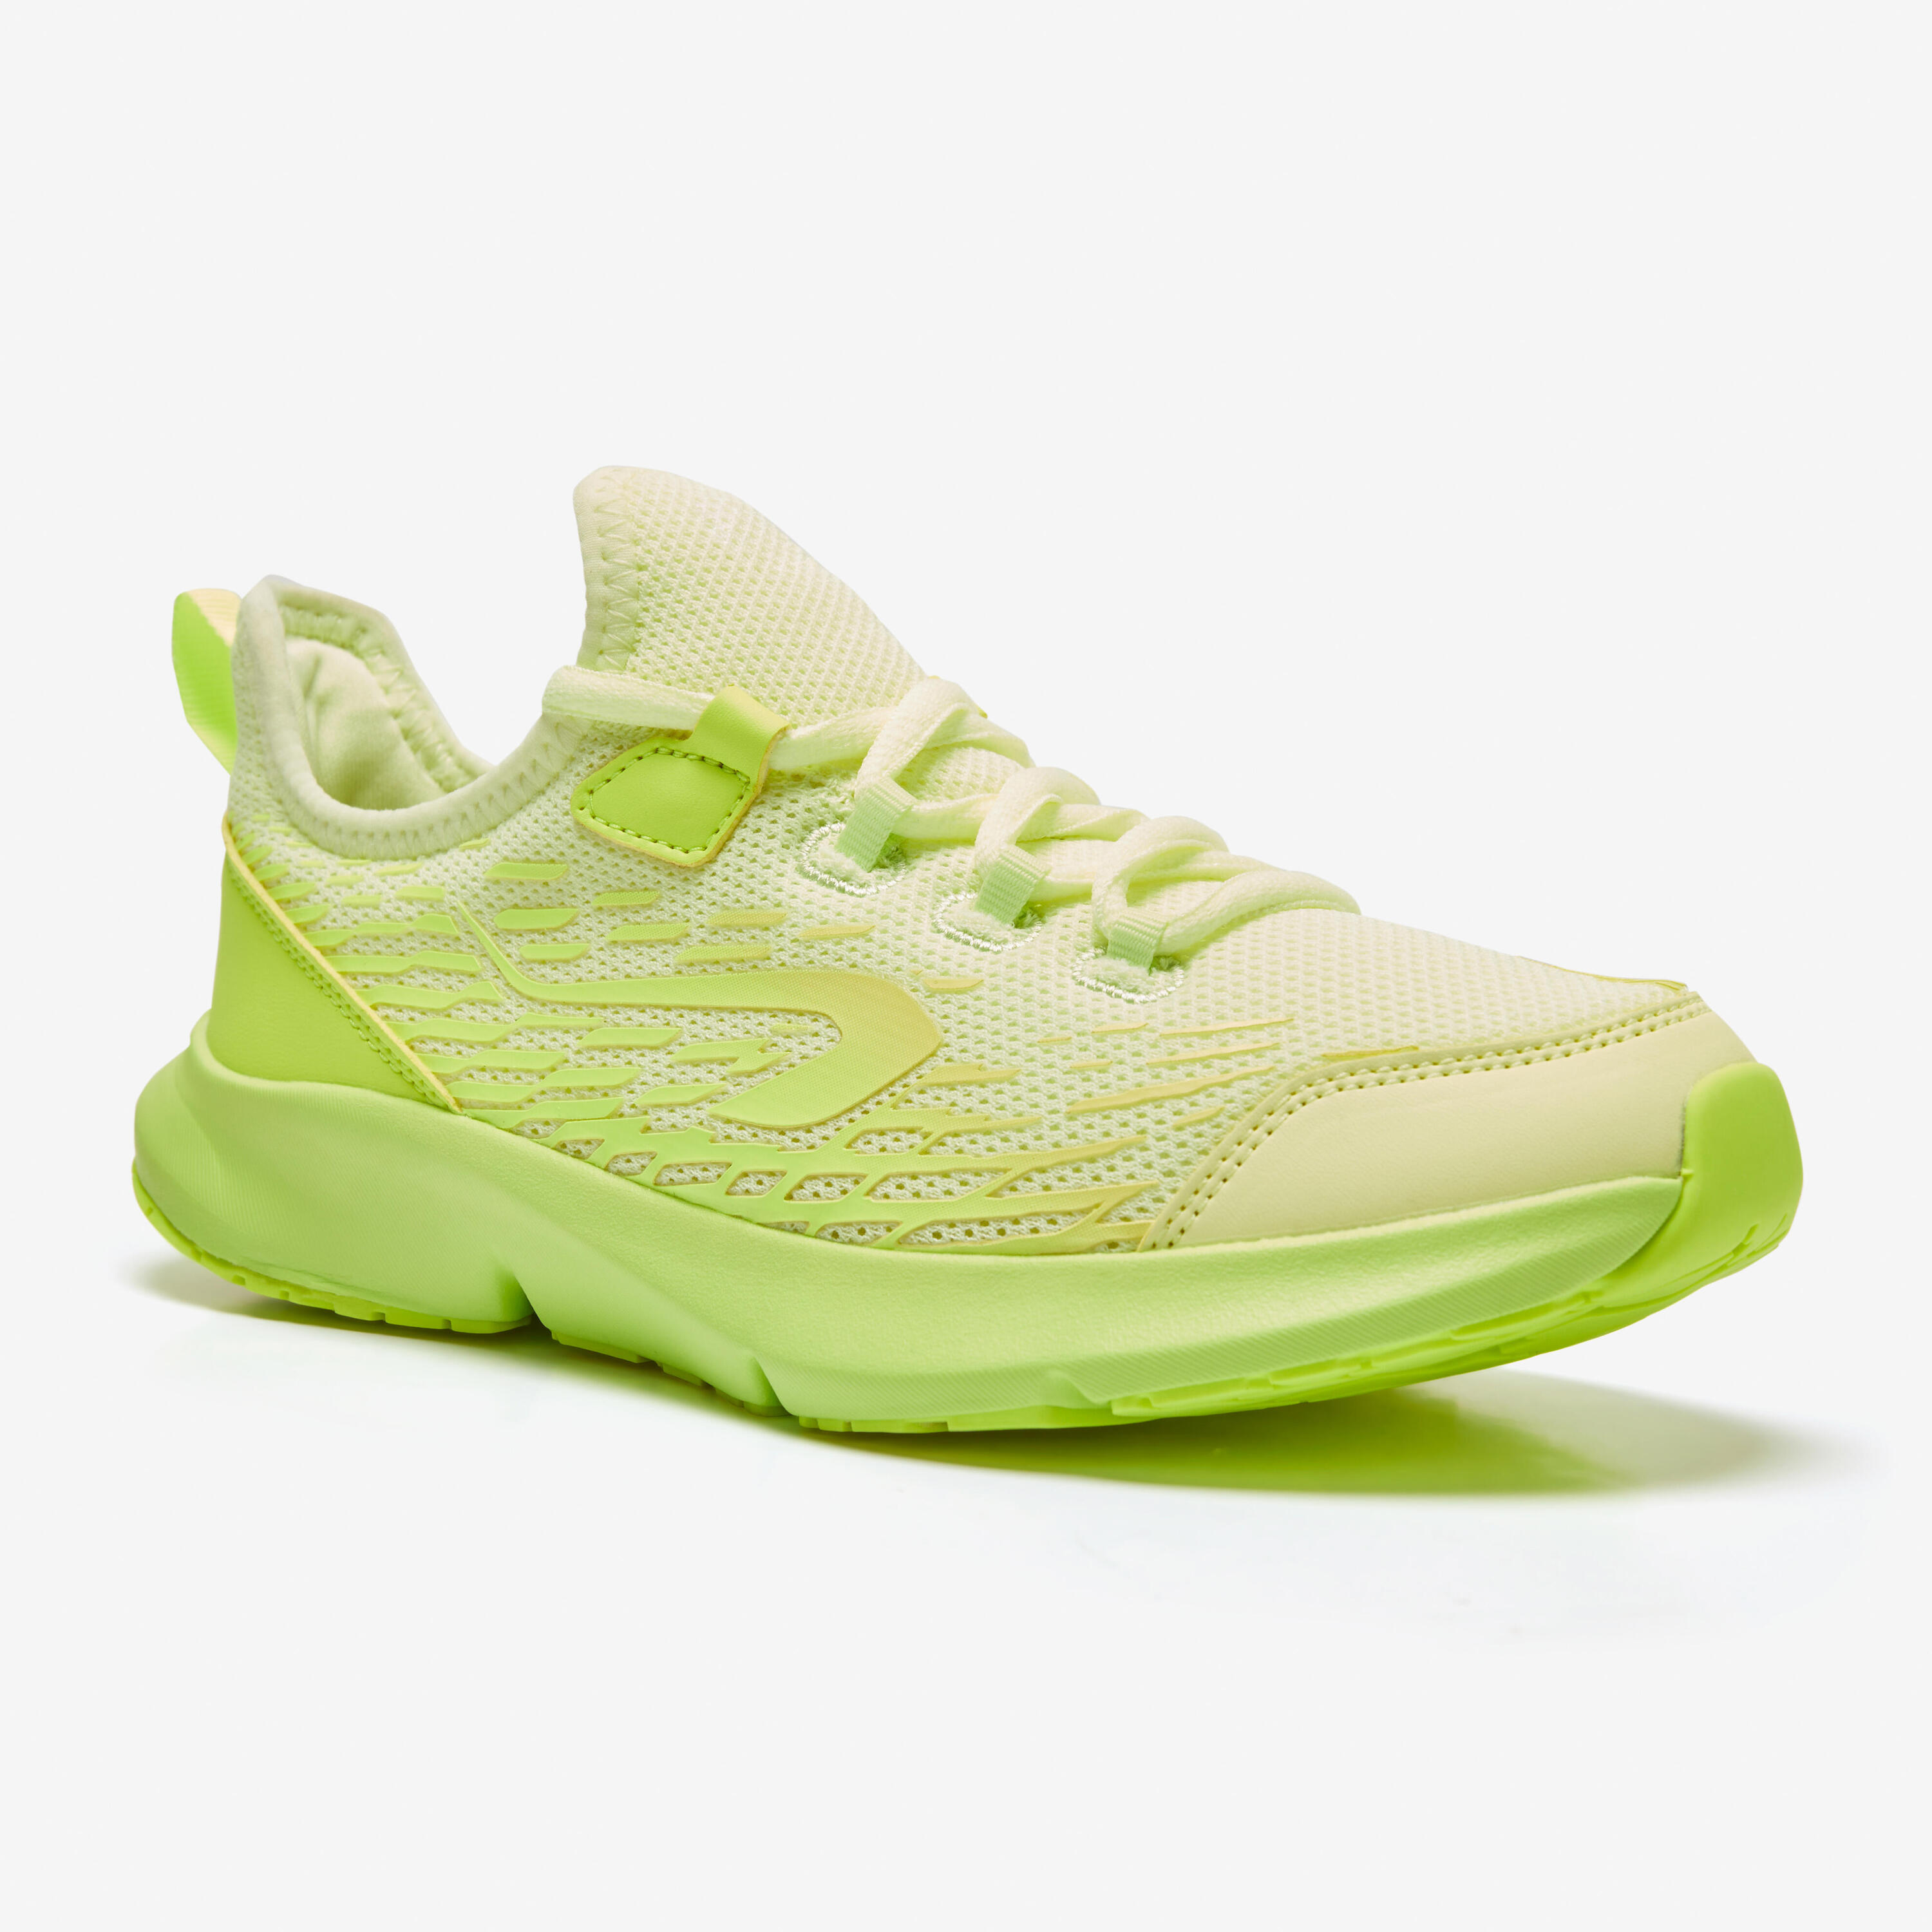 fluo yellow / fluo lime yellow